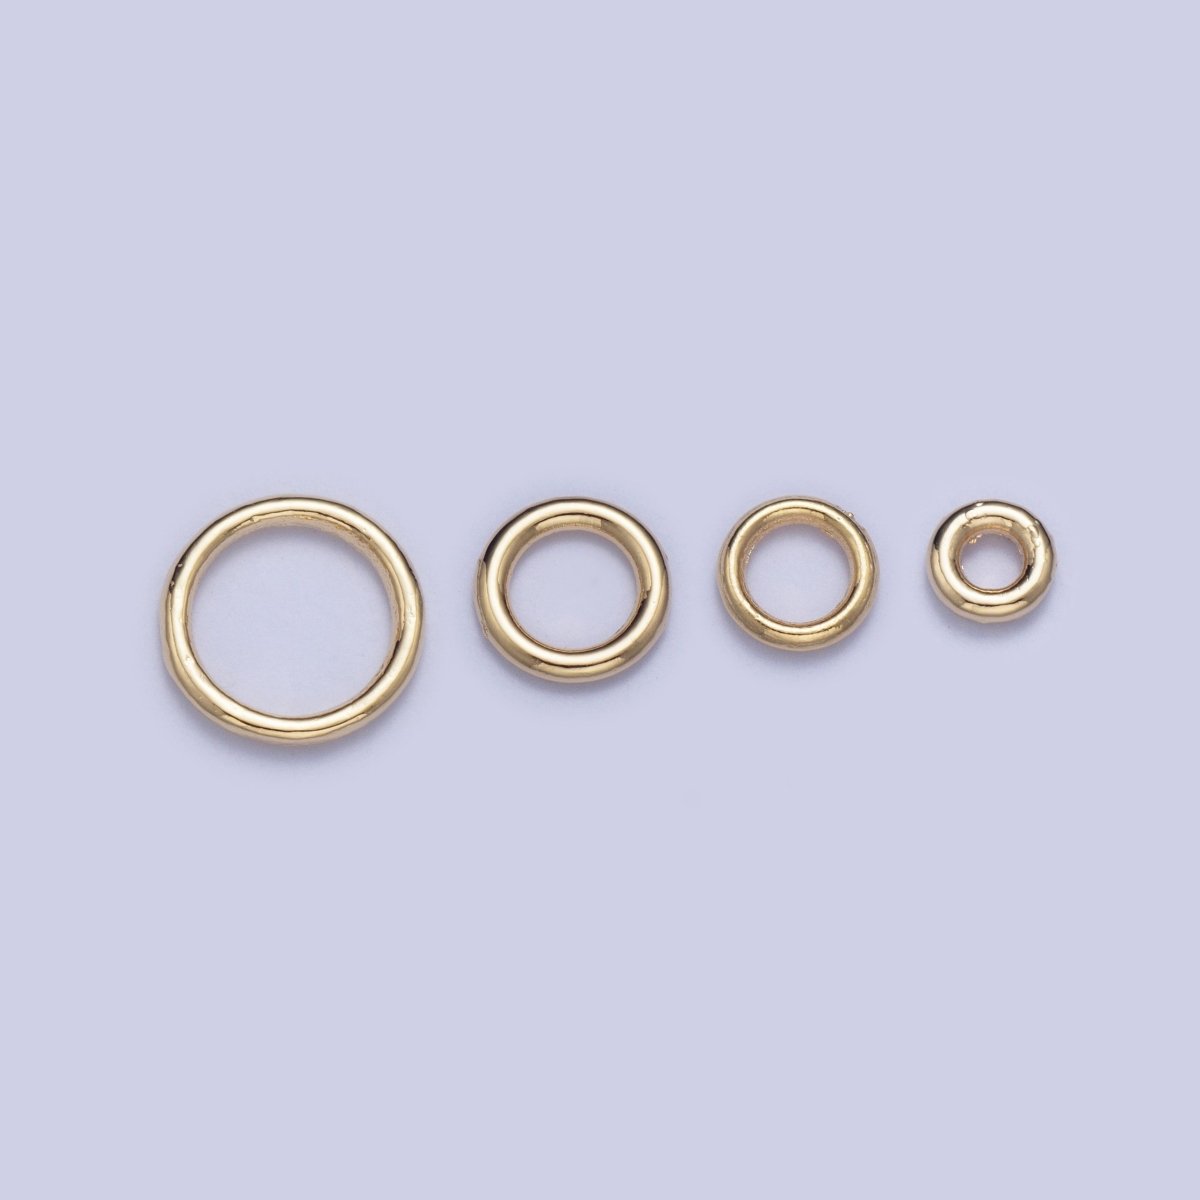 bag Soldered Gold Jump Rings Supply Findings For Jewelry Making L-925-L-928 - DLUXCA